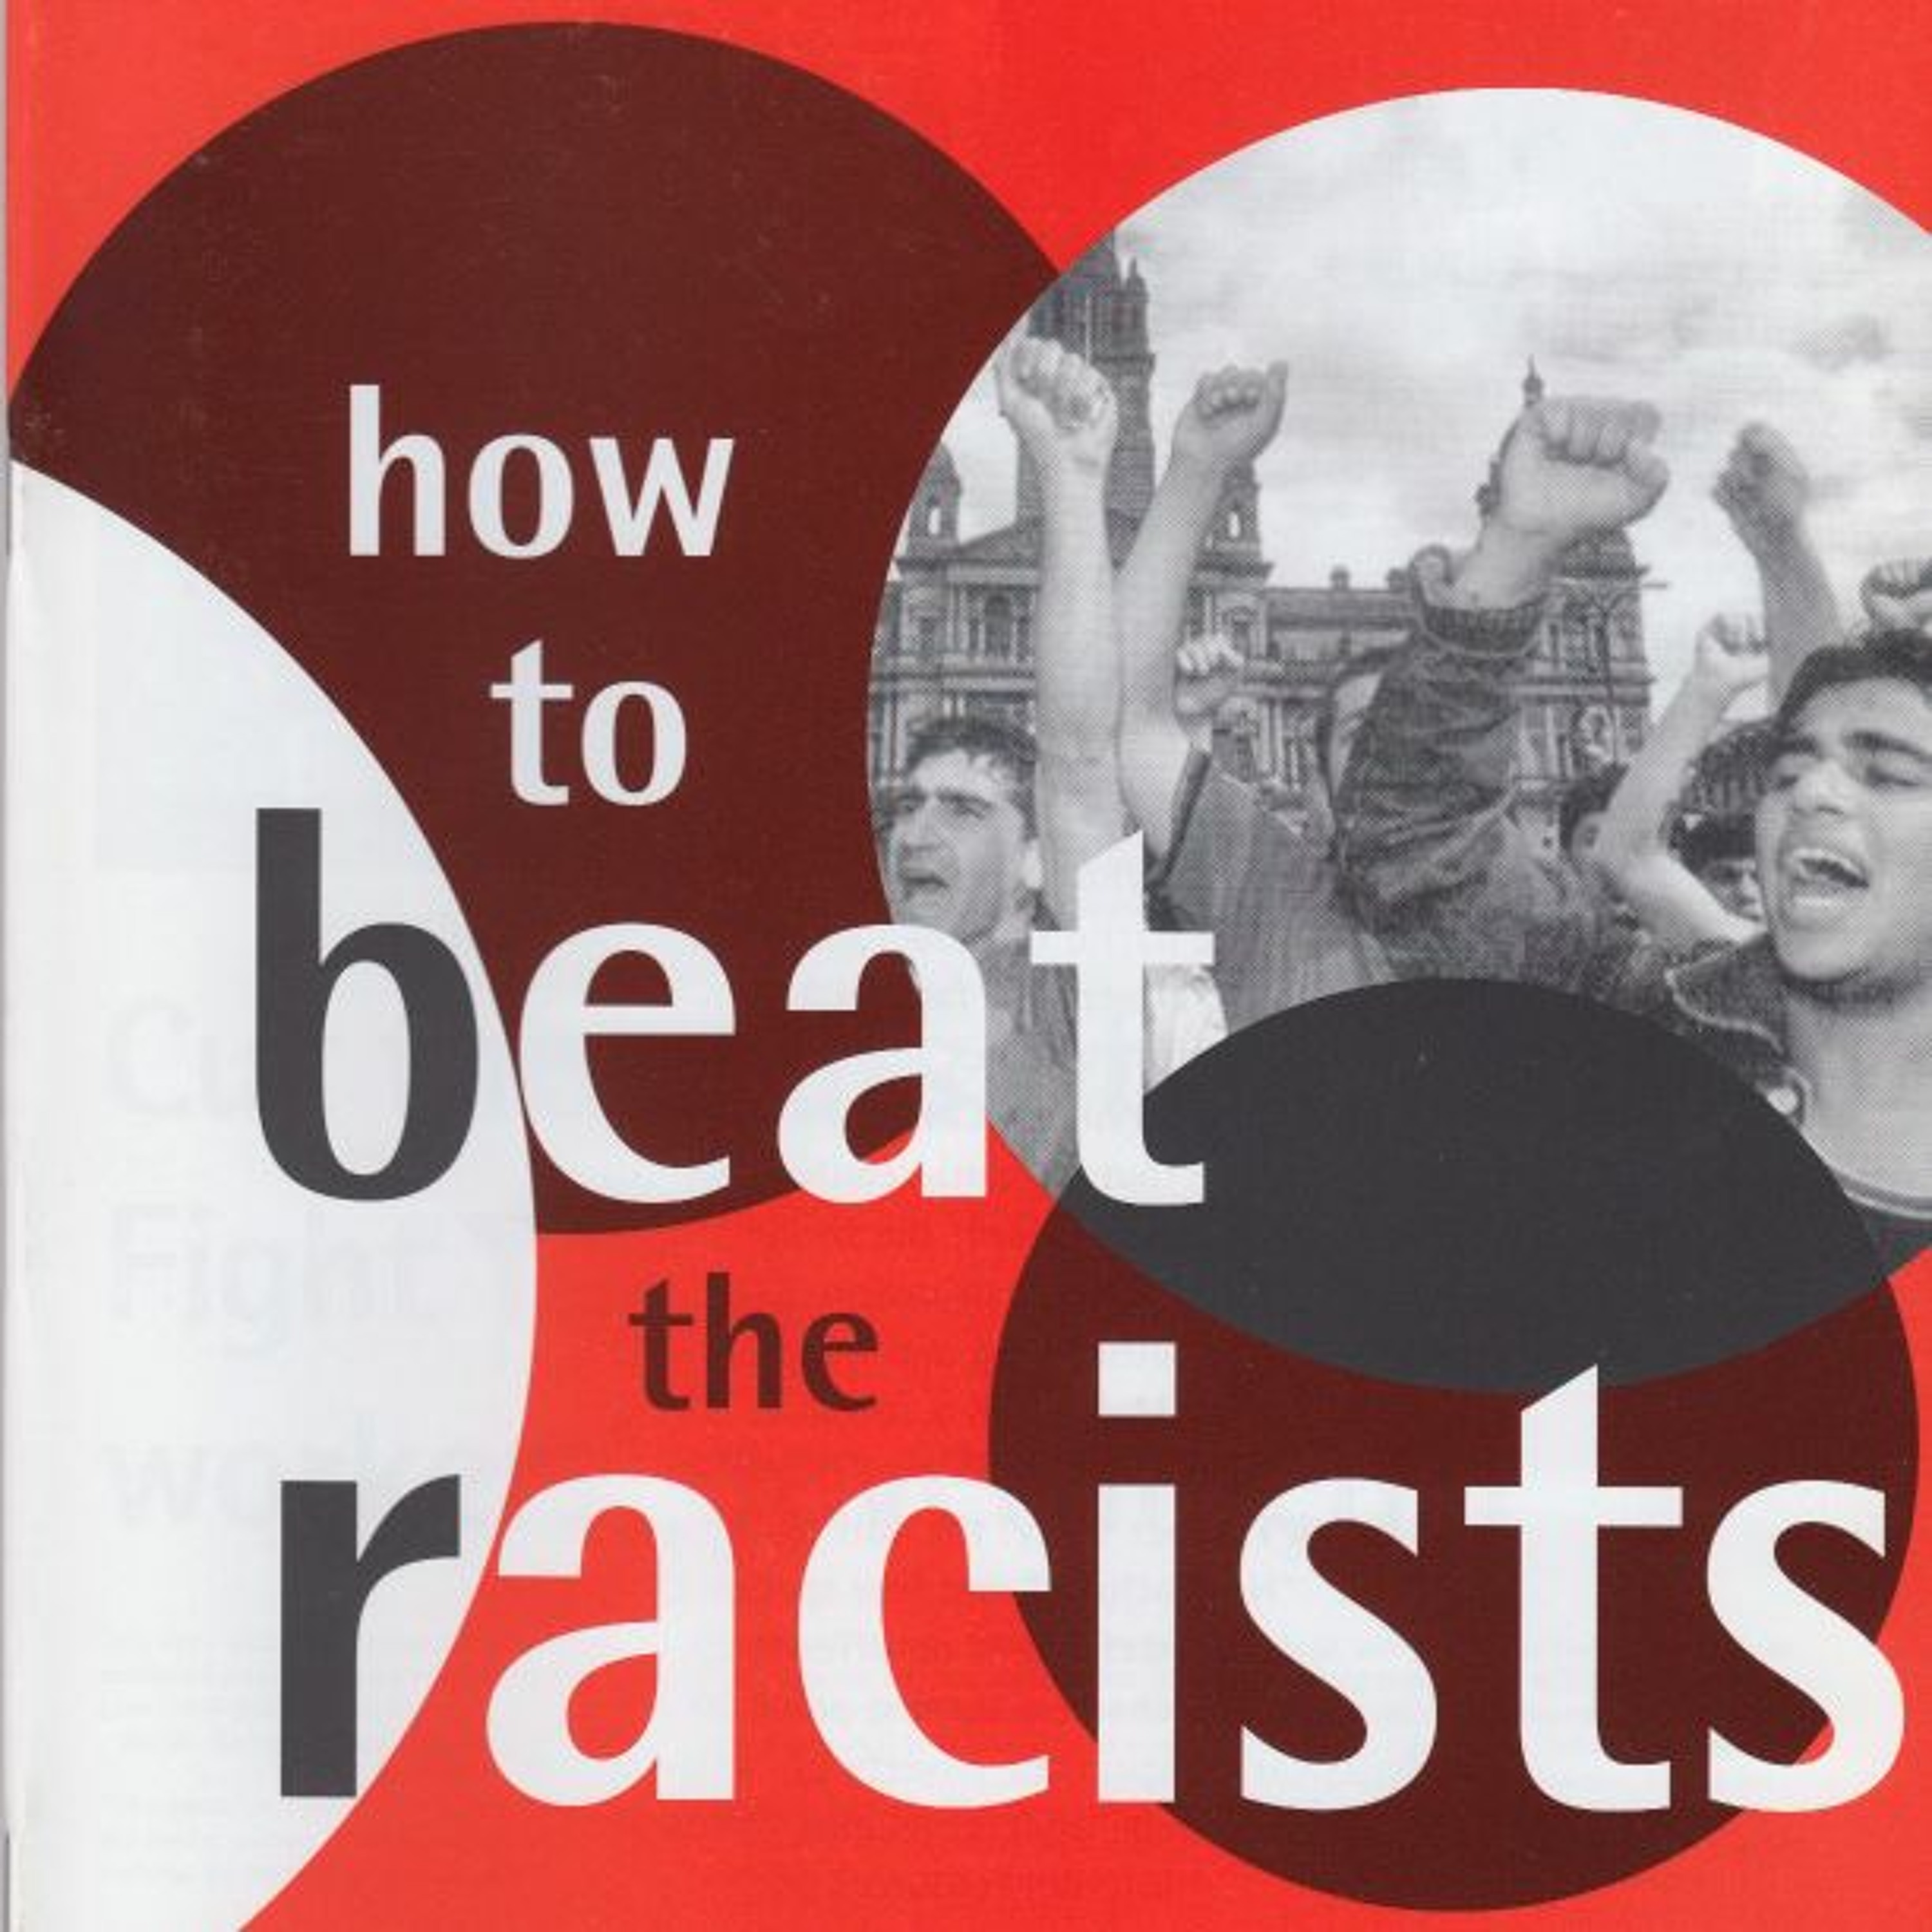 8 of 10 — How to beat the racists — The Nation of Islam; The Black Panthers